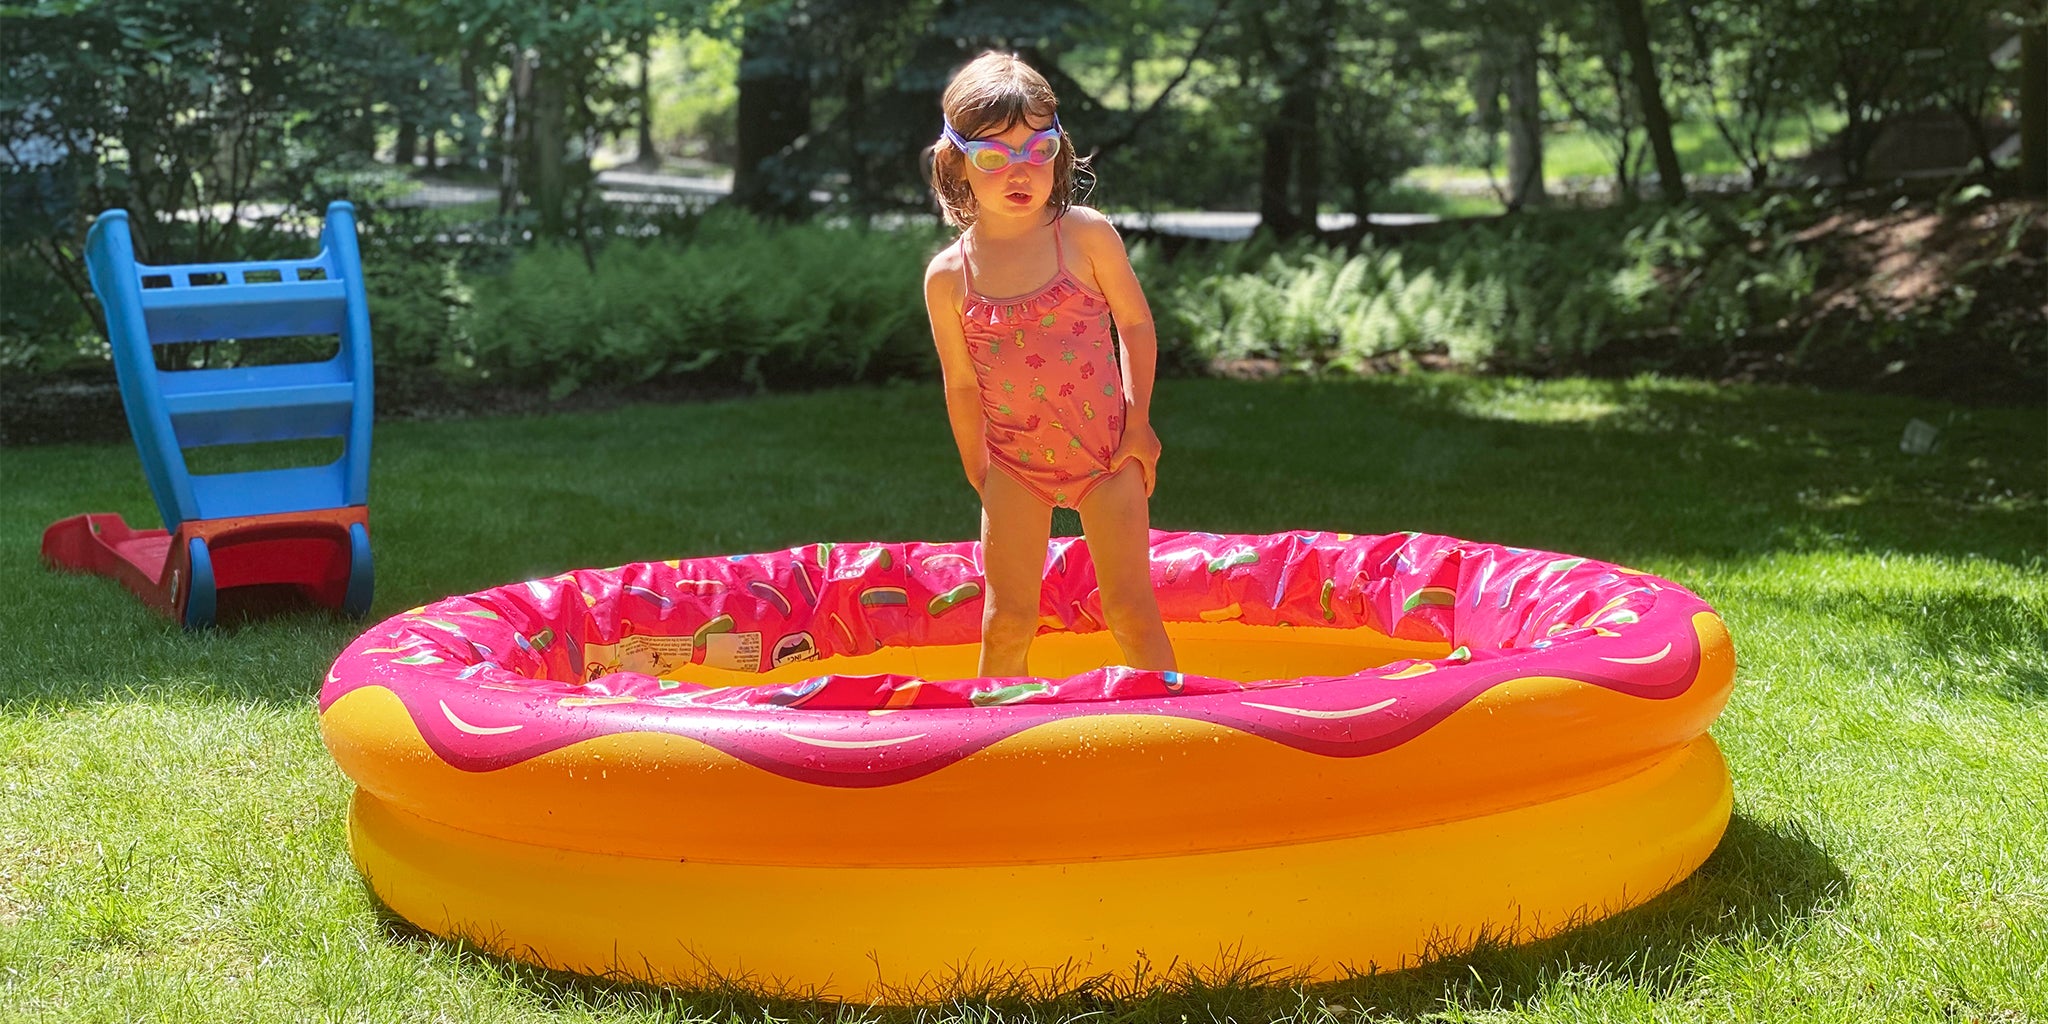 Inflatable pool versus traditional pool chemicals: Which is safer?